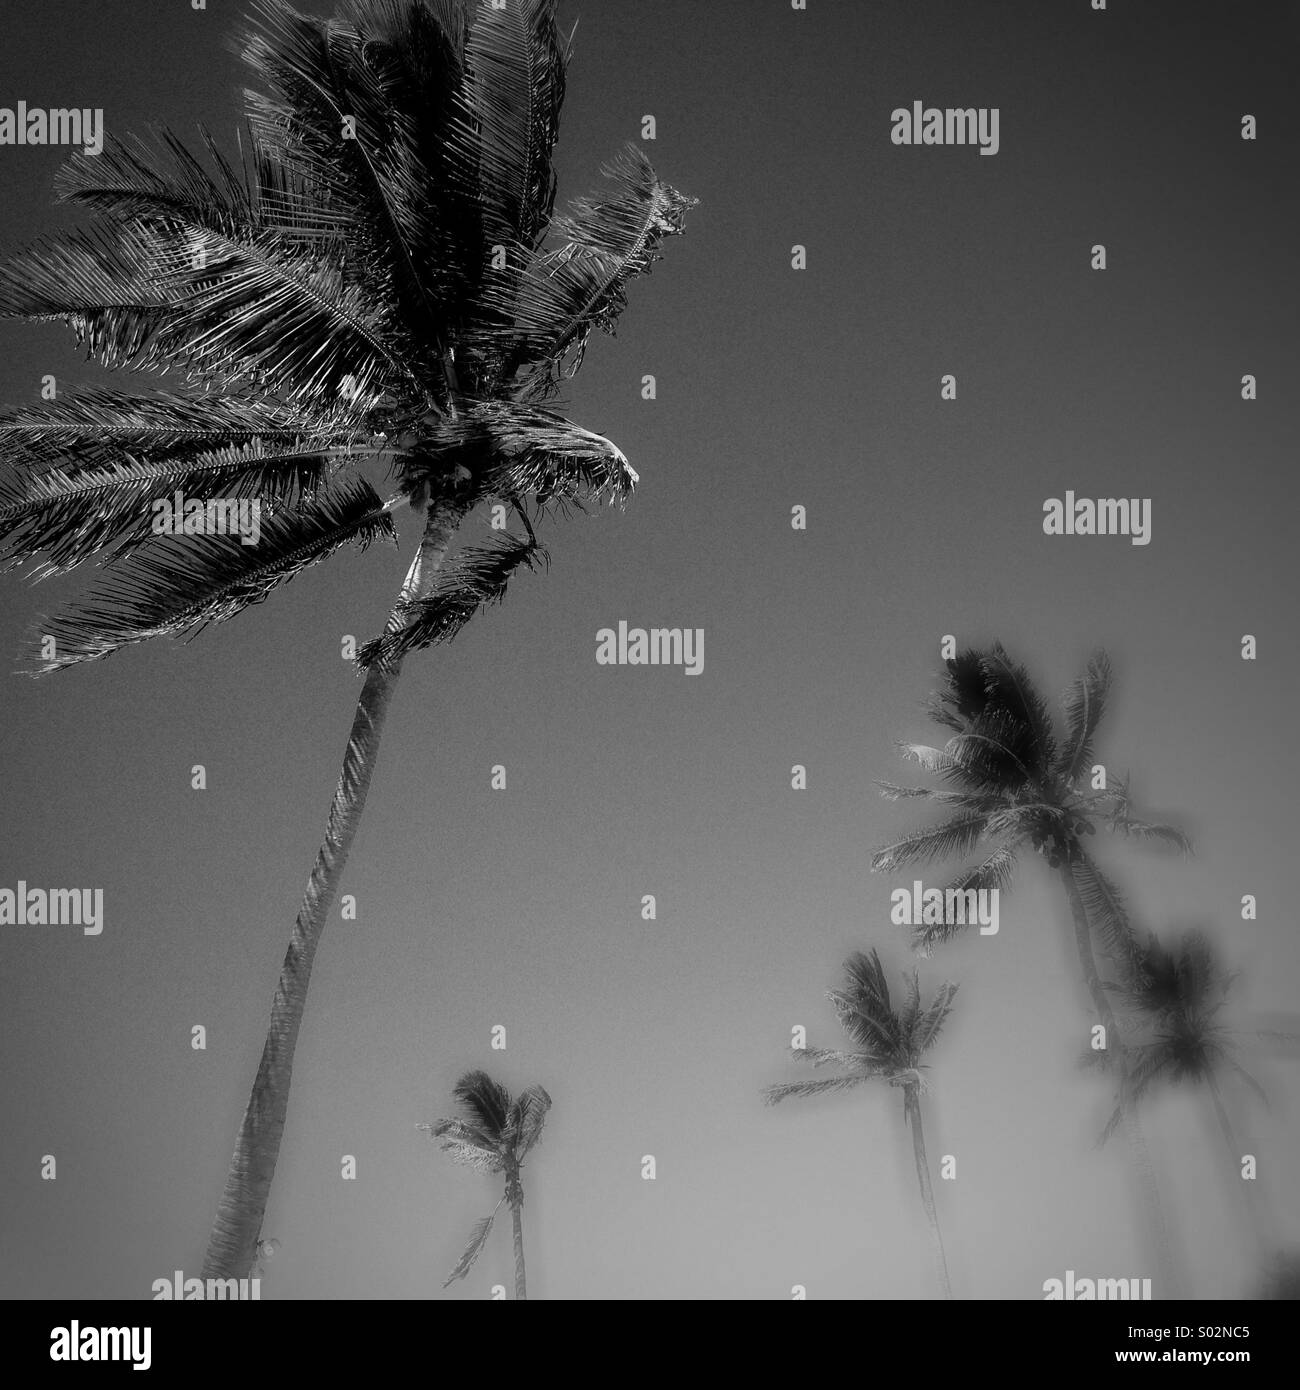 Palm trees against sky, in black and white Stock Photo